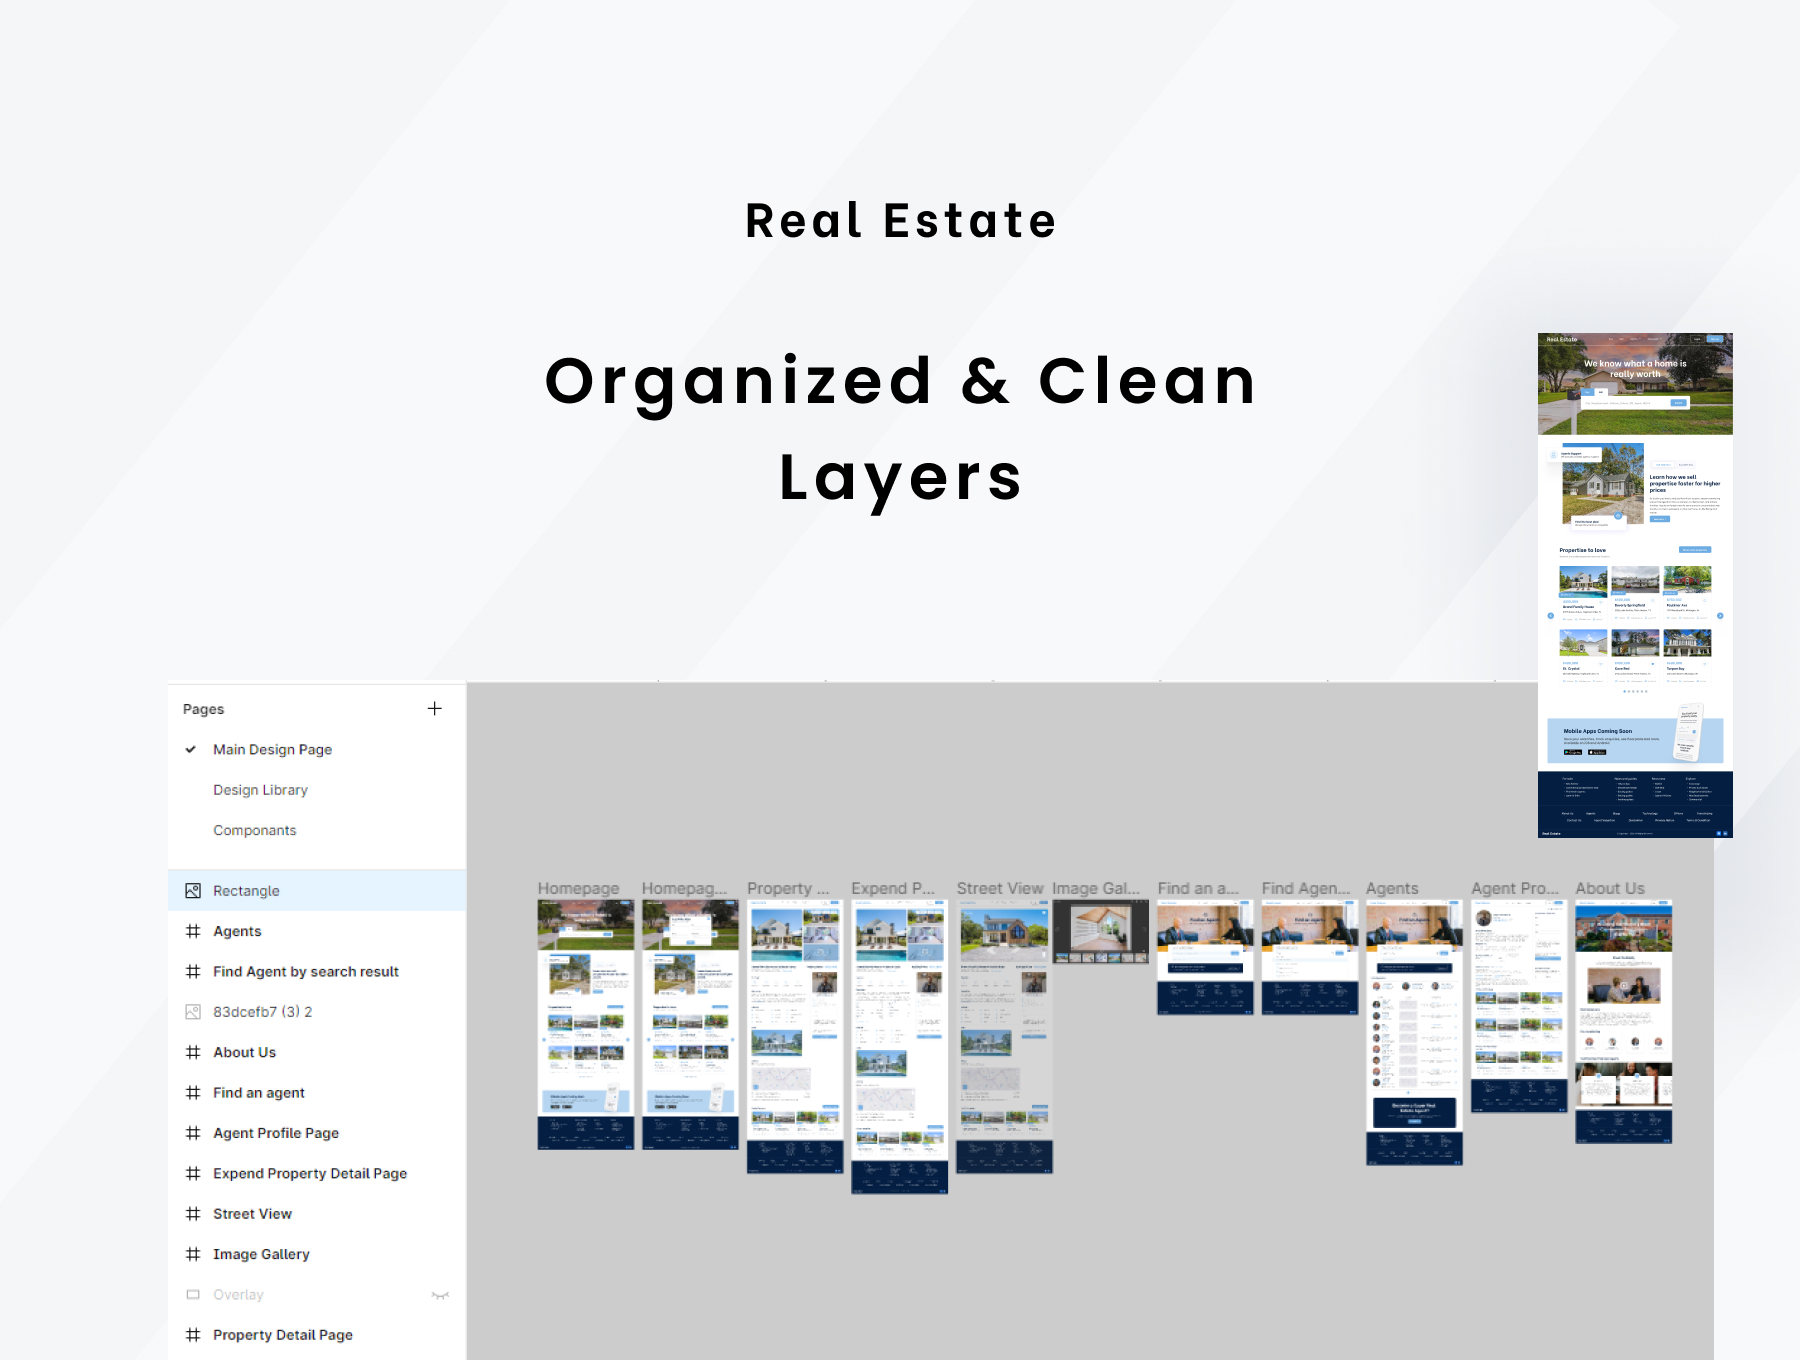 Organized and clean layers.